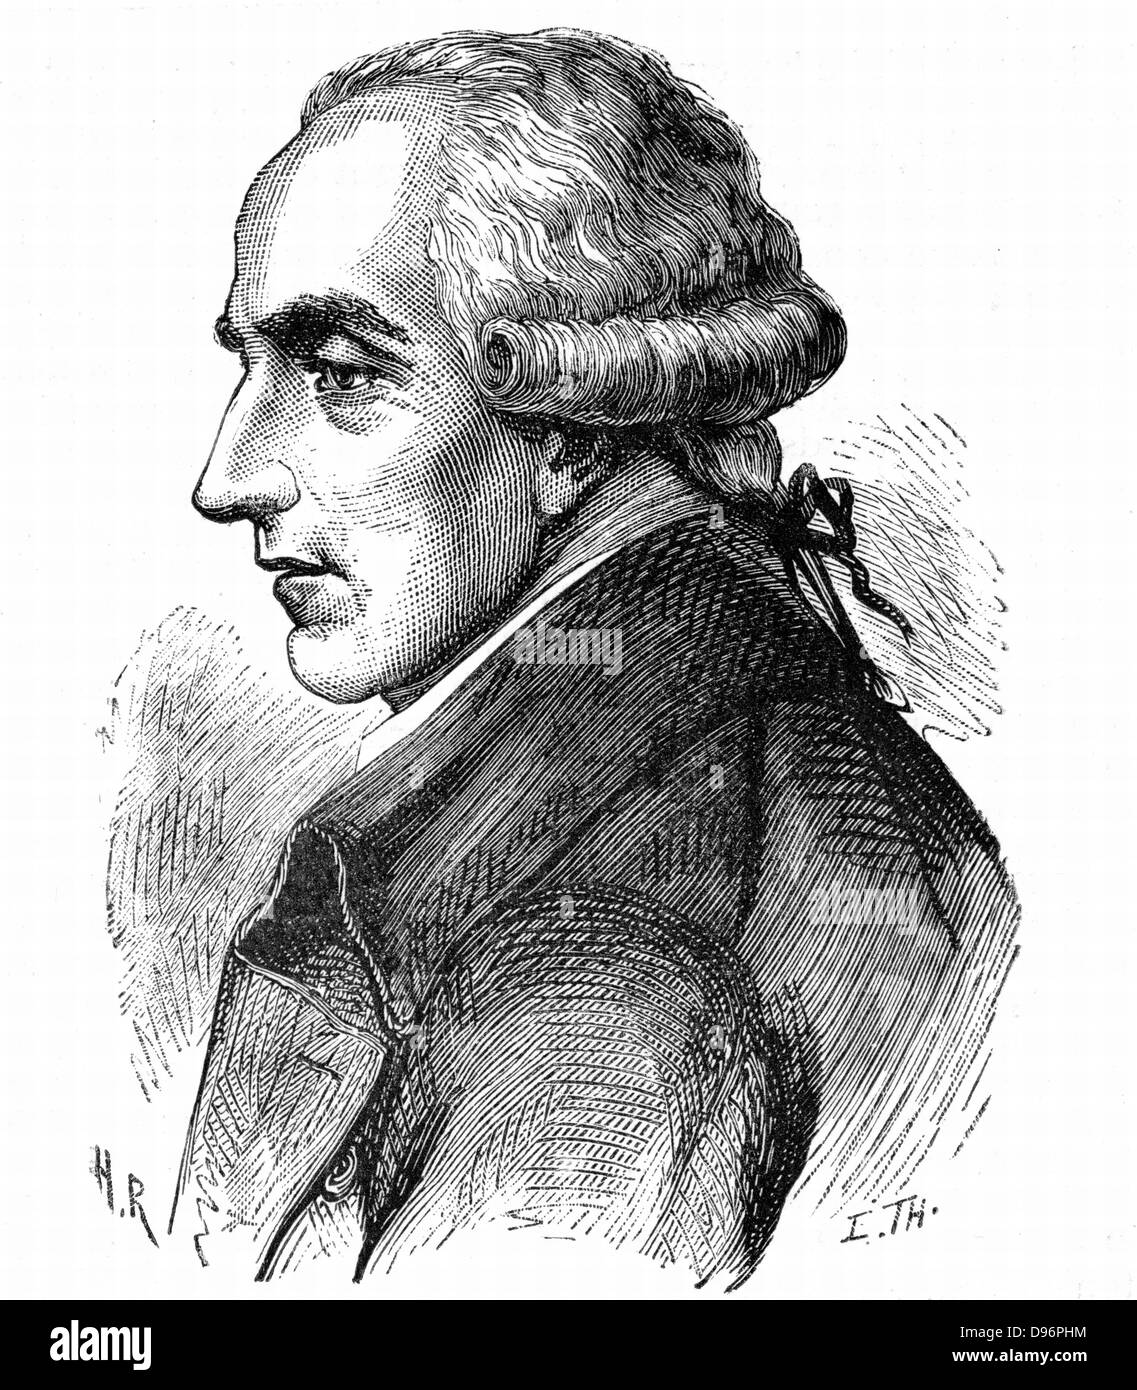 Pierre Simon Laplace (1749-1827), French mathematician and astronomer. [1881]. His five volume 'Mecanique celeste' 1799-1825 was the greatest work on celestial mechanics since Newton's 'Principia'. From 'A Popular History of Science' by Robert Routledge. Stock Photo